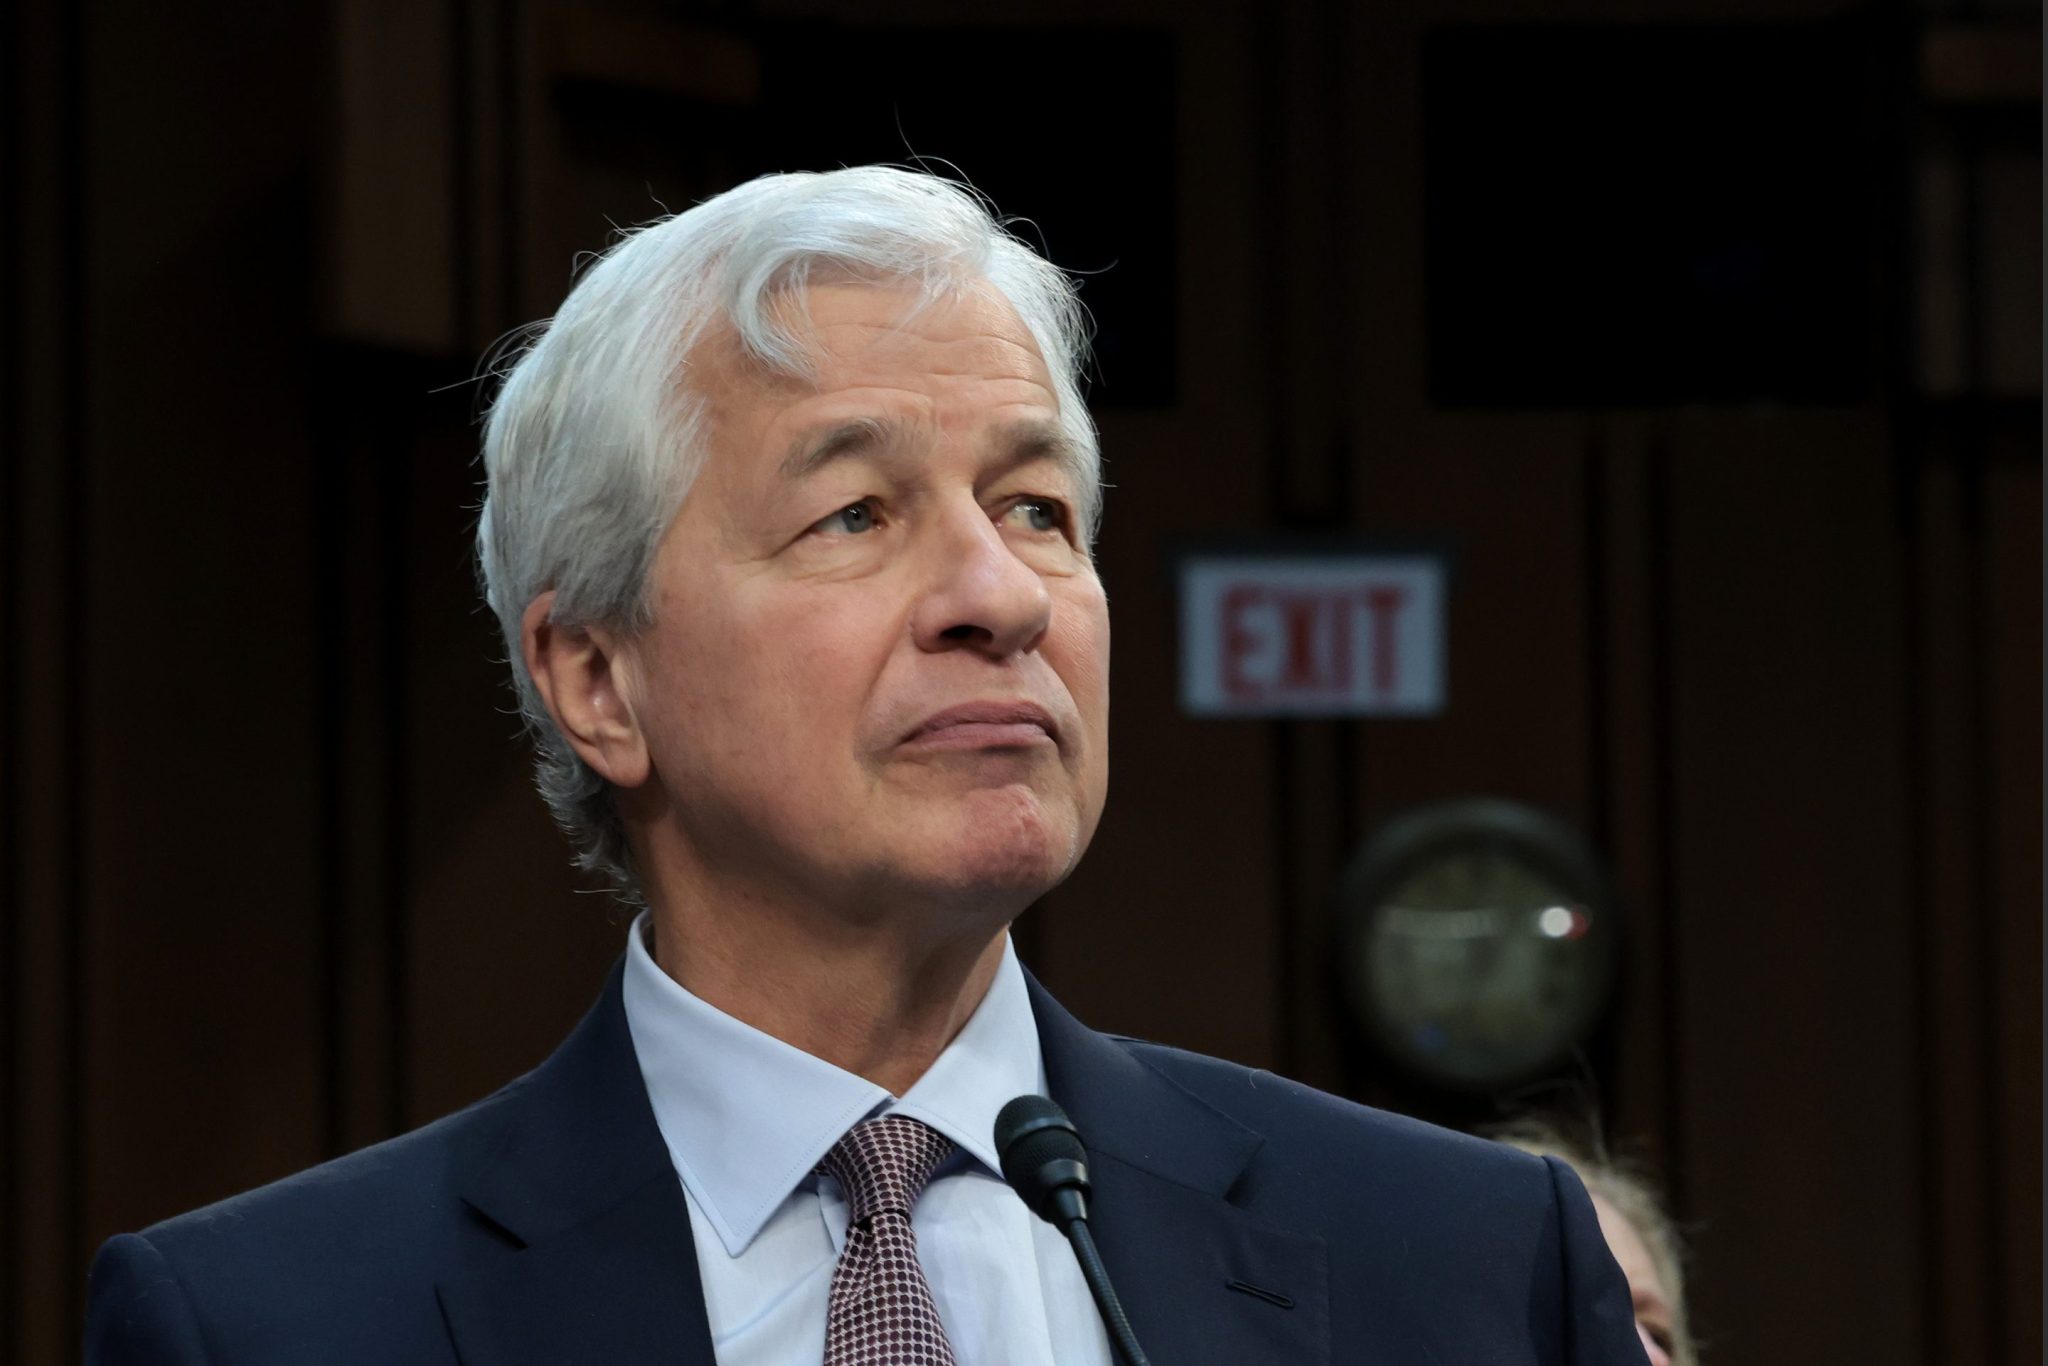 JPMorgan’s Jamie Dimon: Not out of the woods on recession, but ‘worst case would be stagflation’